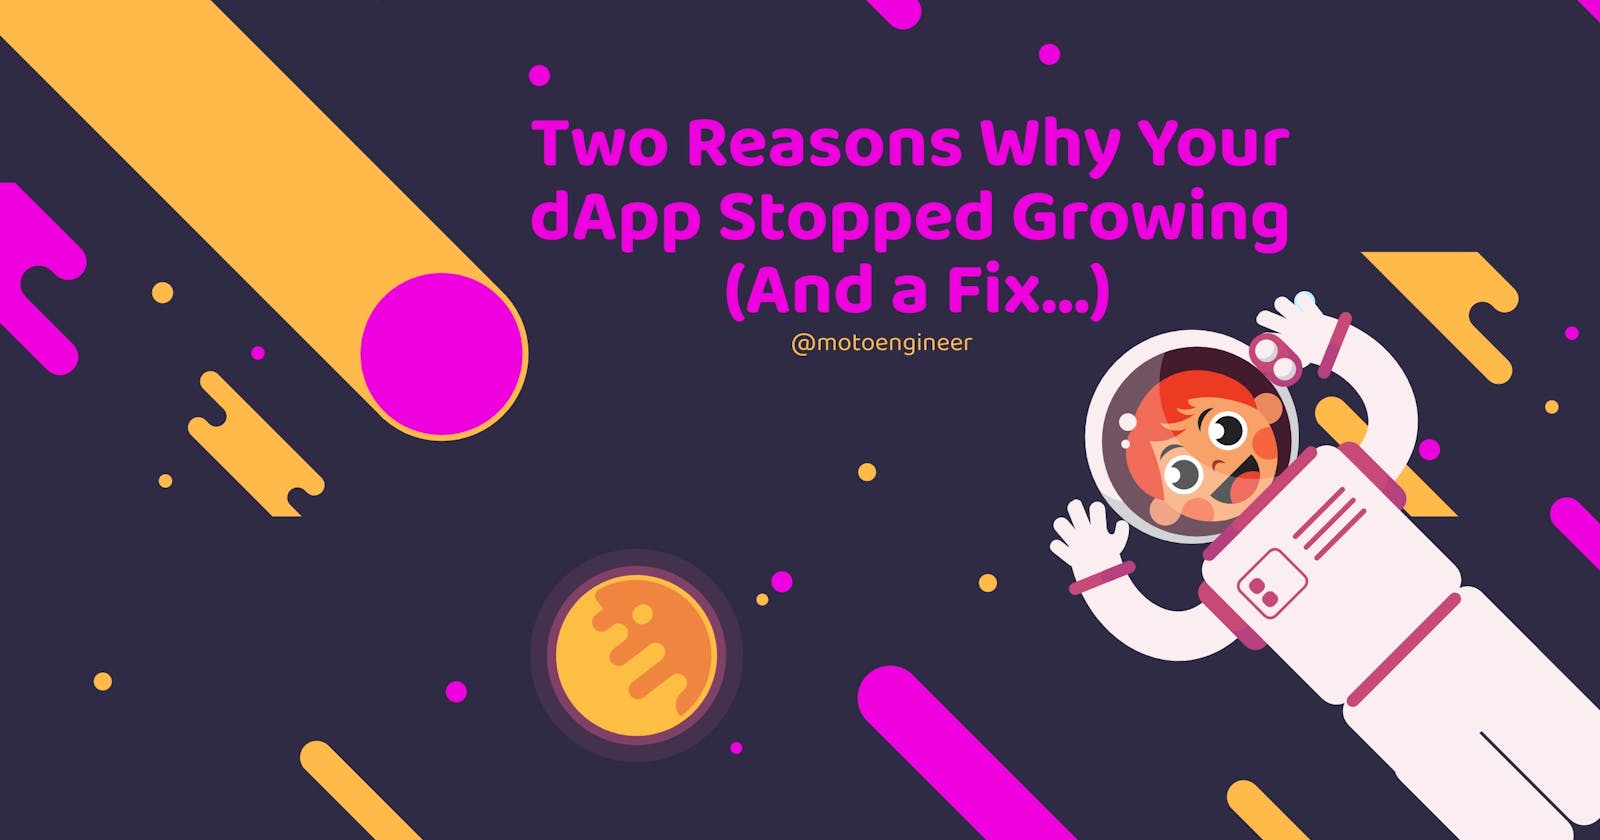 Two Reasons Why Your DApp Stopped Growing (And a Fix…)